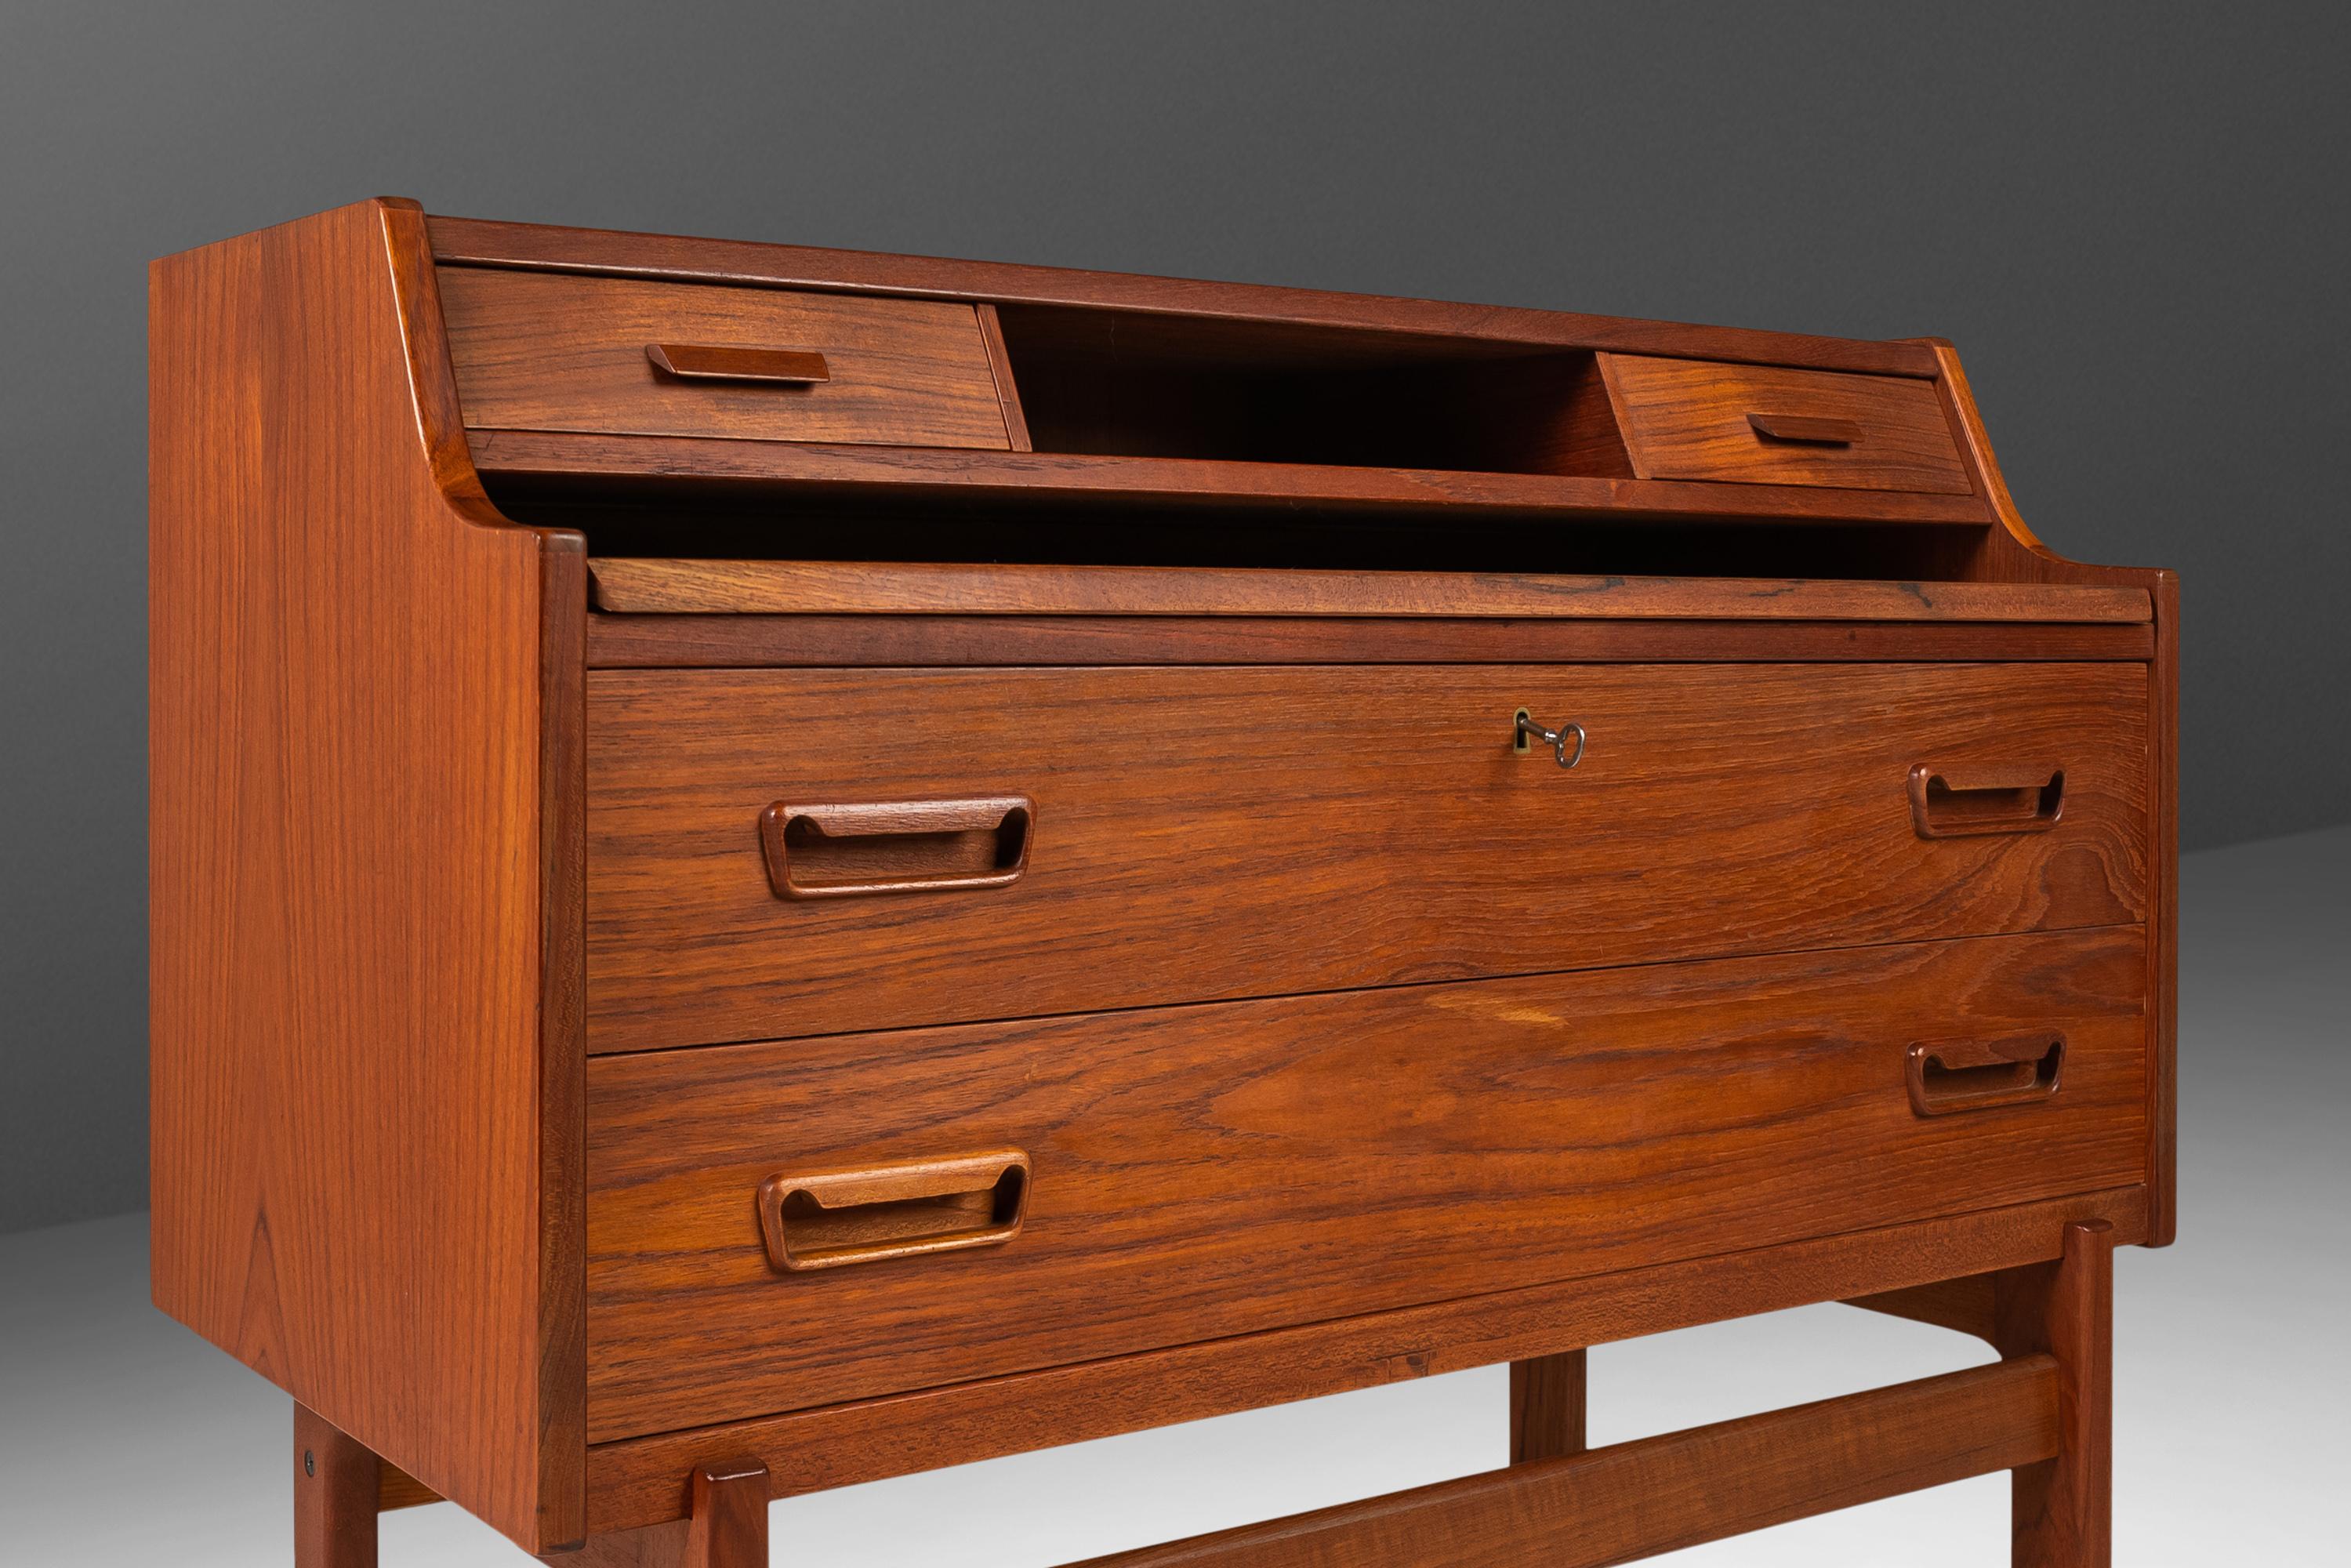 Ideal for collectors limited on space but unwilling to compromise on style and functionality this splendid secretary desk, designed by the influential Arne Wahl Iversen, is the quintessential example of Danish Modern design. Constructed in teak with